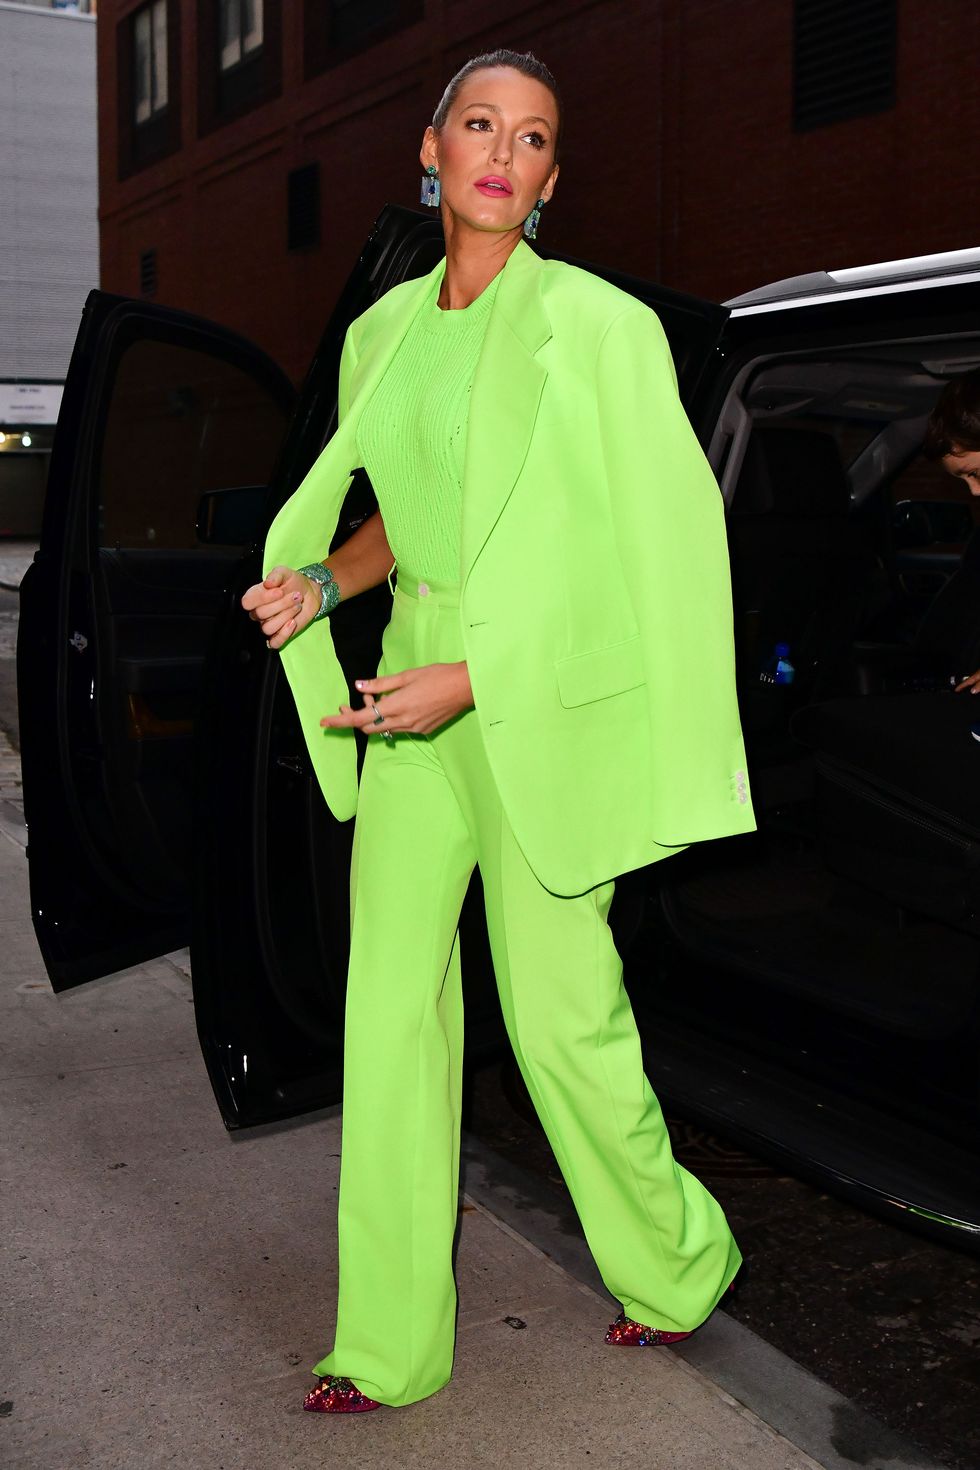 Blake Lively steps out in a neon-green suit